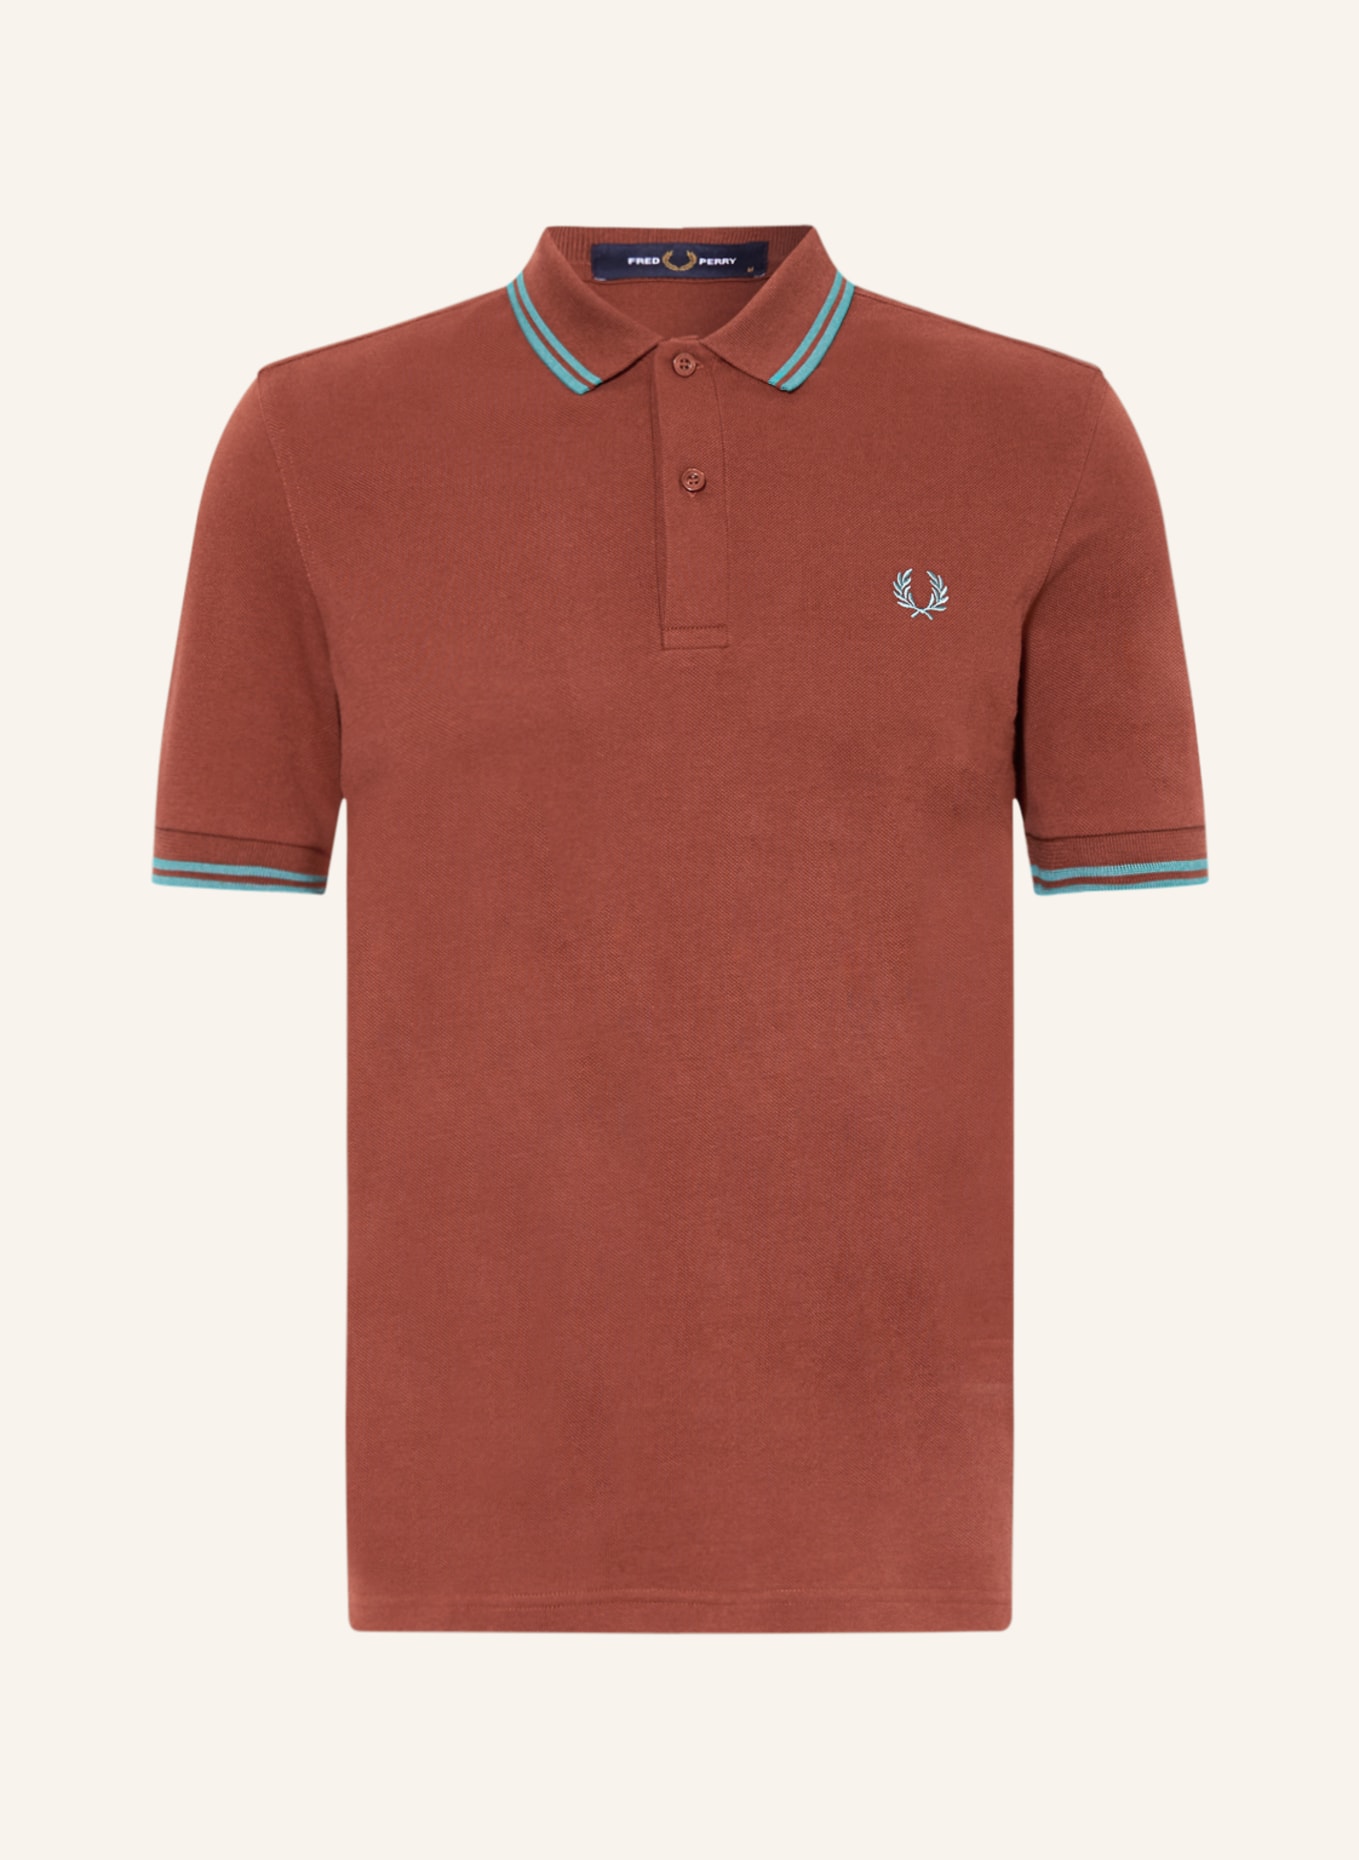 Рубашка поло FRED PERRY Piqué M3600 Slim Fit кроссовки fred perry porcelain blanco